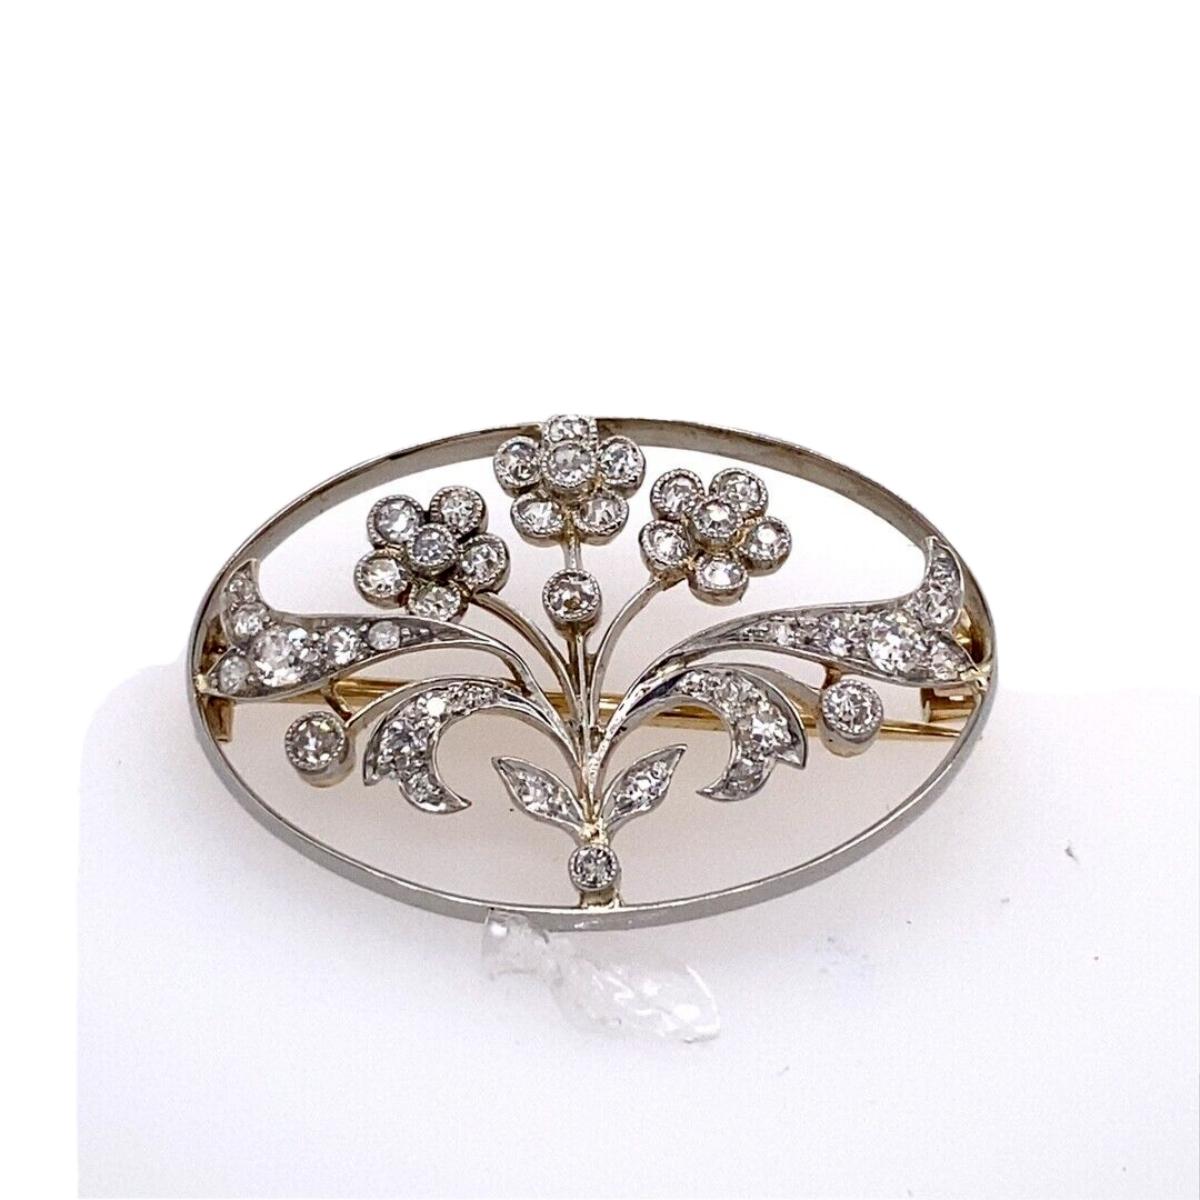 Antique 15ct Yellow & White Gold With Victorian Cut Diamonds Oval Floral Brooch

This stunning brooch in 14ct White Gold set with 6 Victorian cut natural Diamonds and small Diamonds set on leaves, with total Diamond weight features a 1.20ct F/G